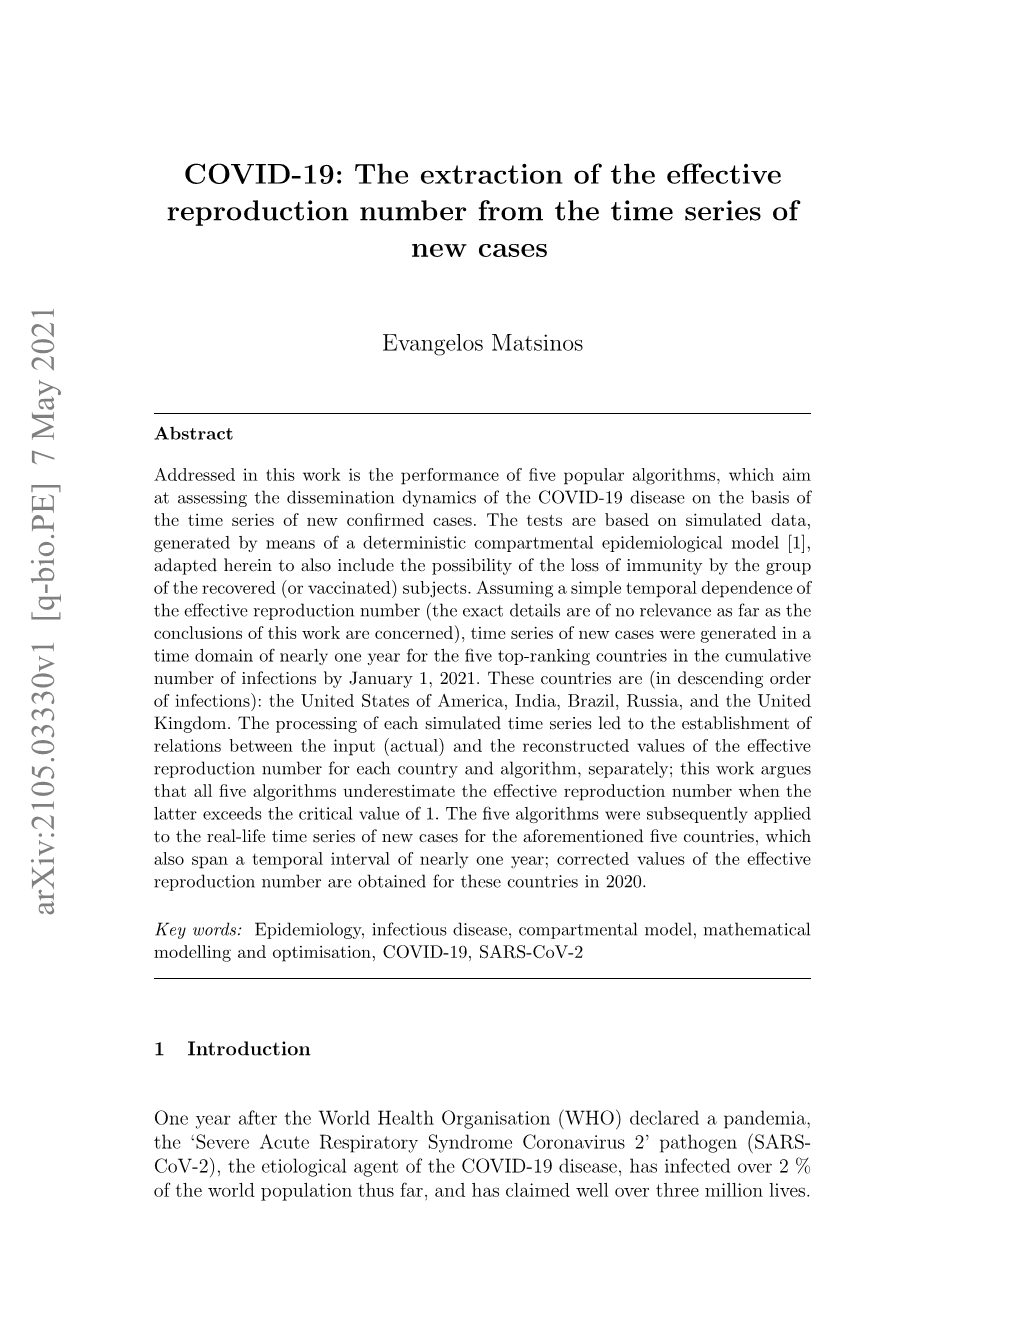 COVID-19: the Extraction of the Effective Reproduction Number From